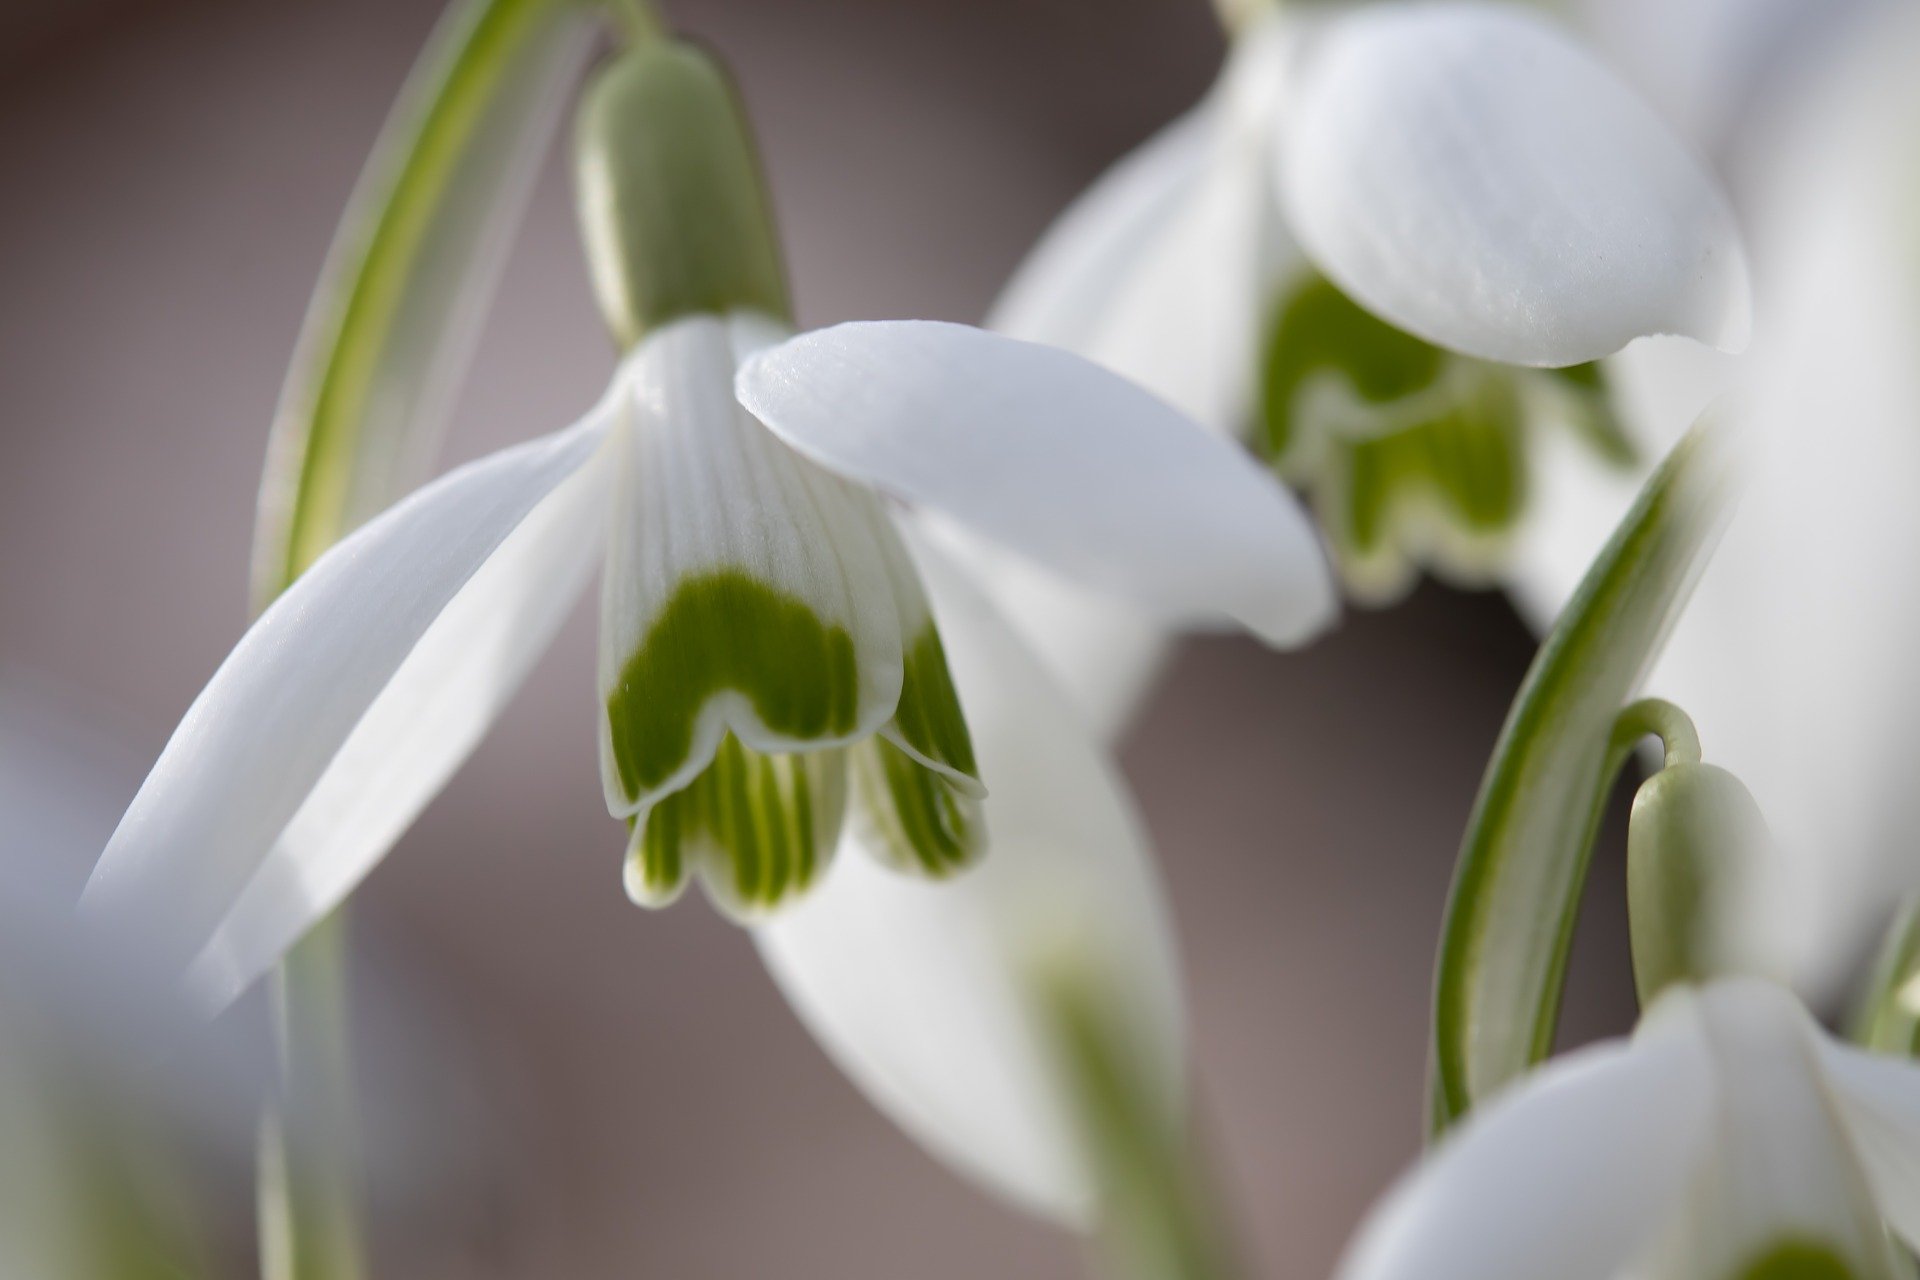 A close-up of a Snowdrop, showing the green markings on the